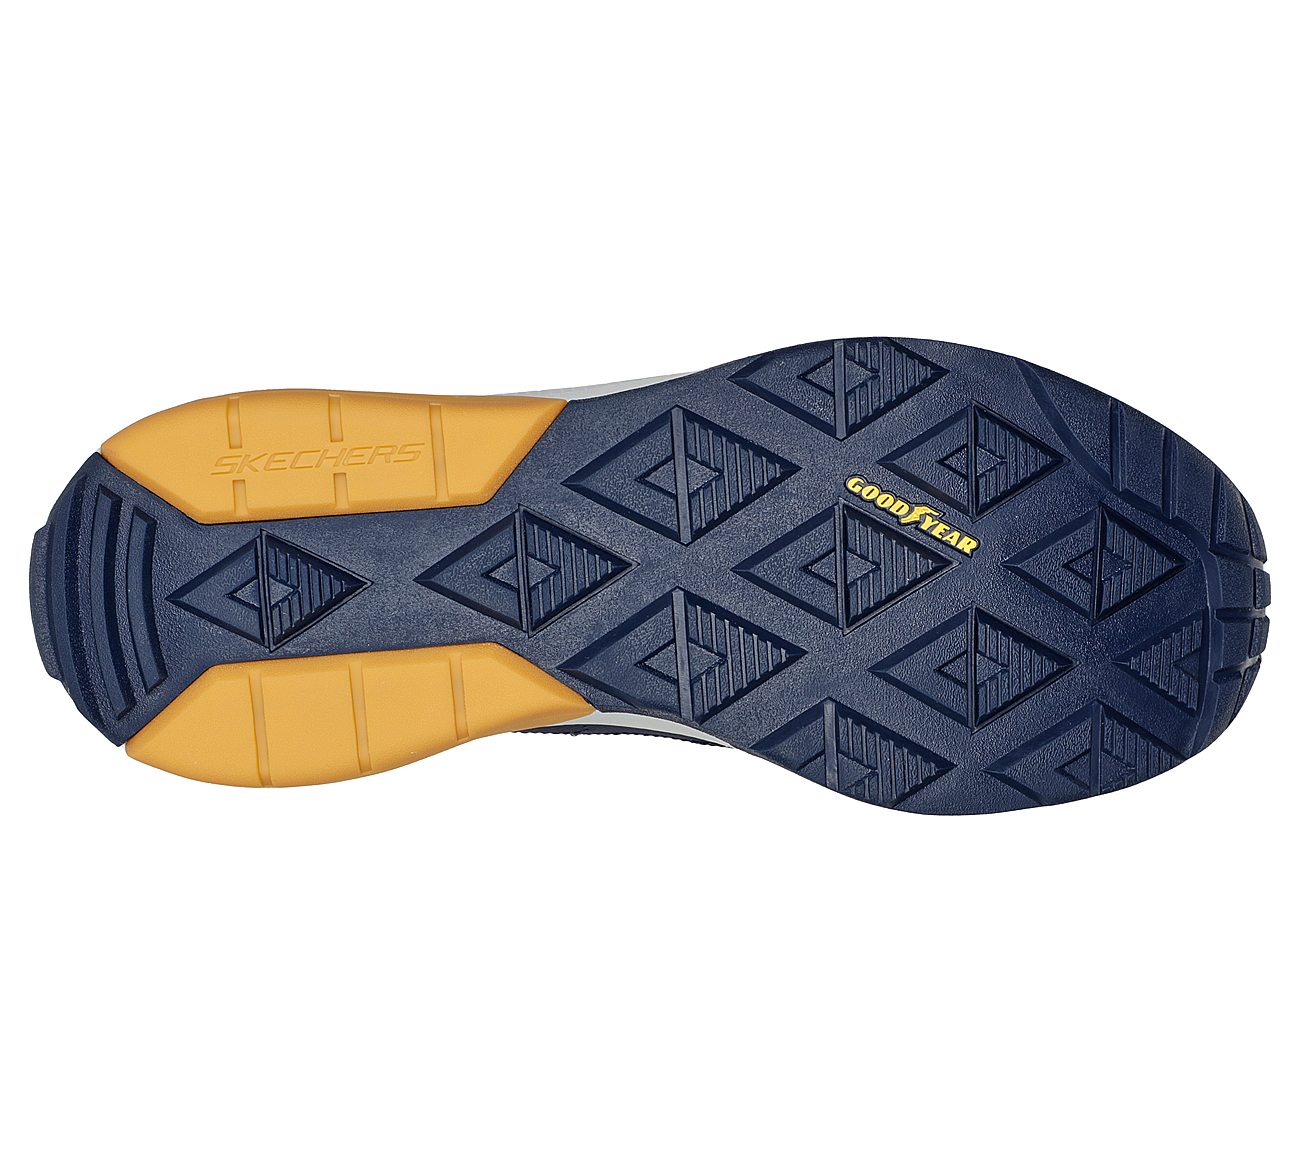 SKECH-AIR EXTREME V2, NAVY/WHITE Footwear Bottom View